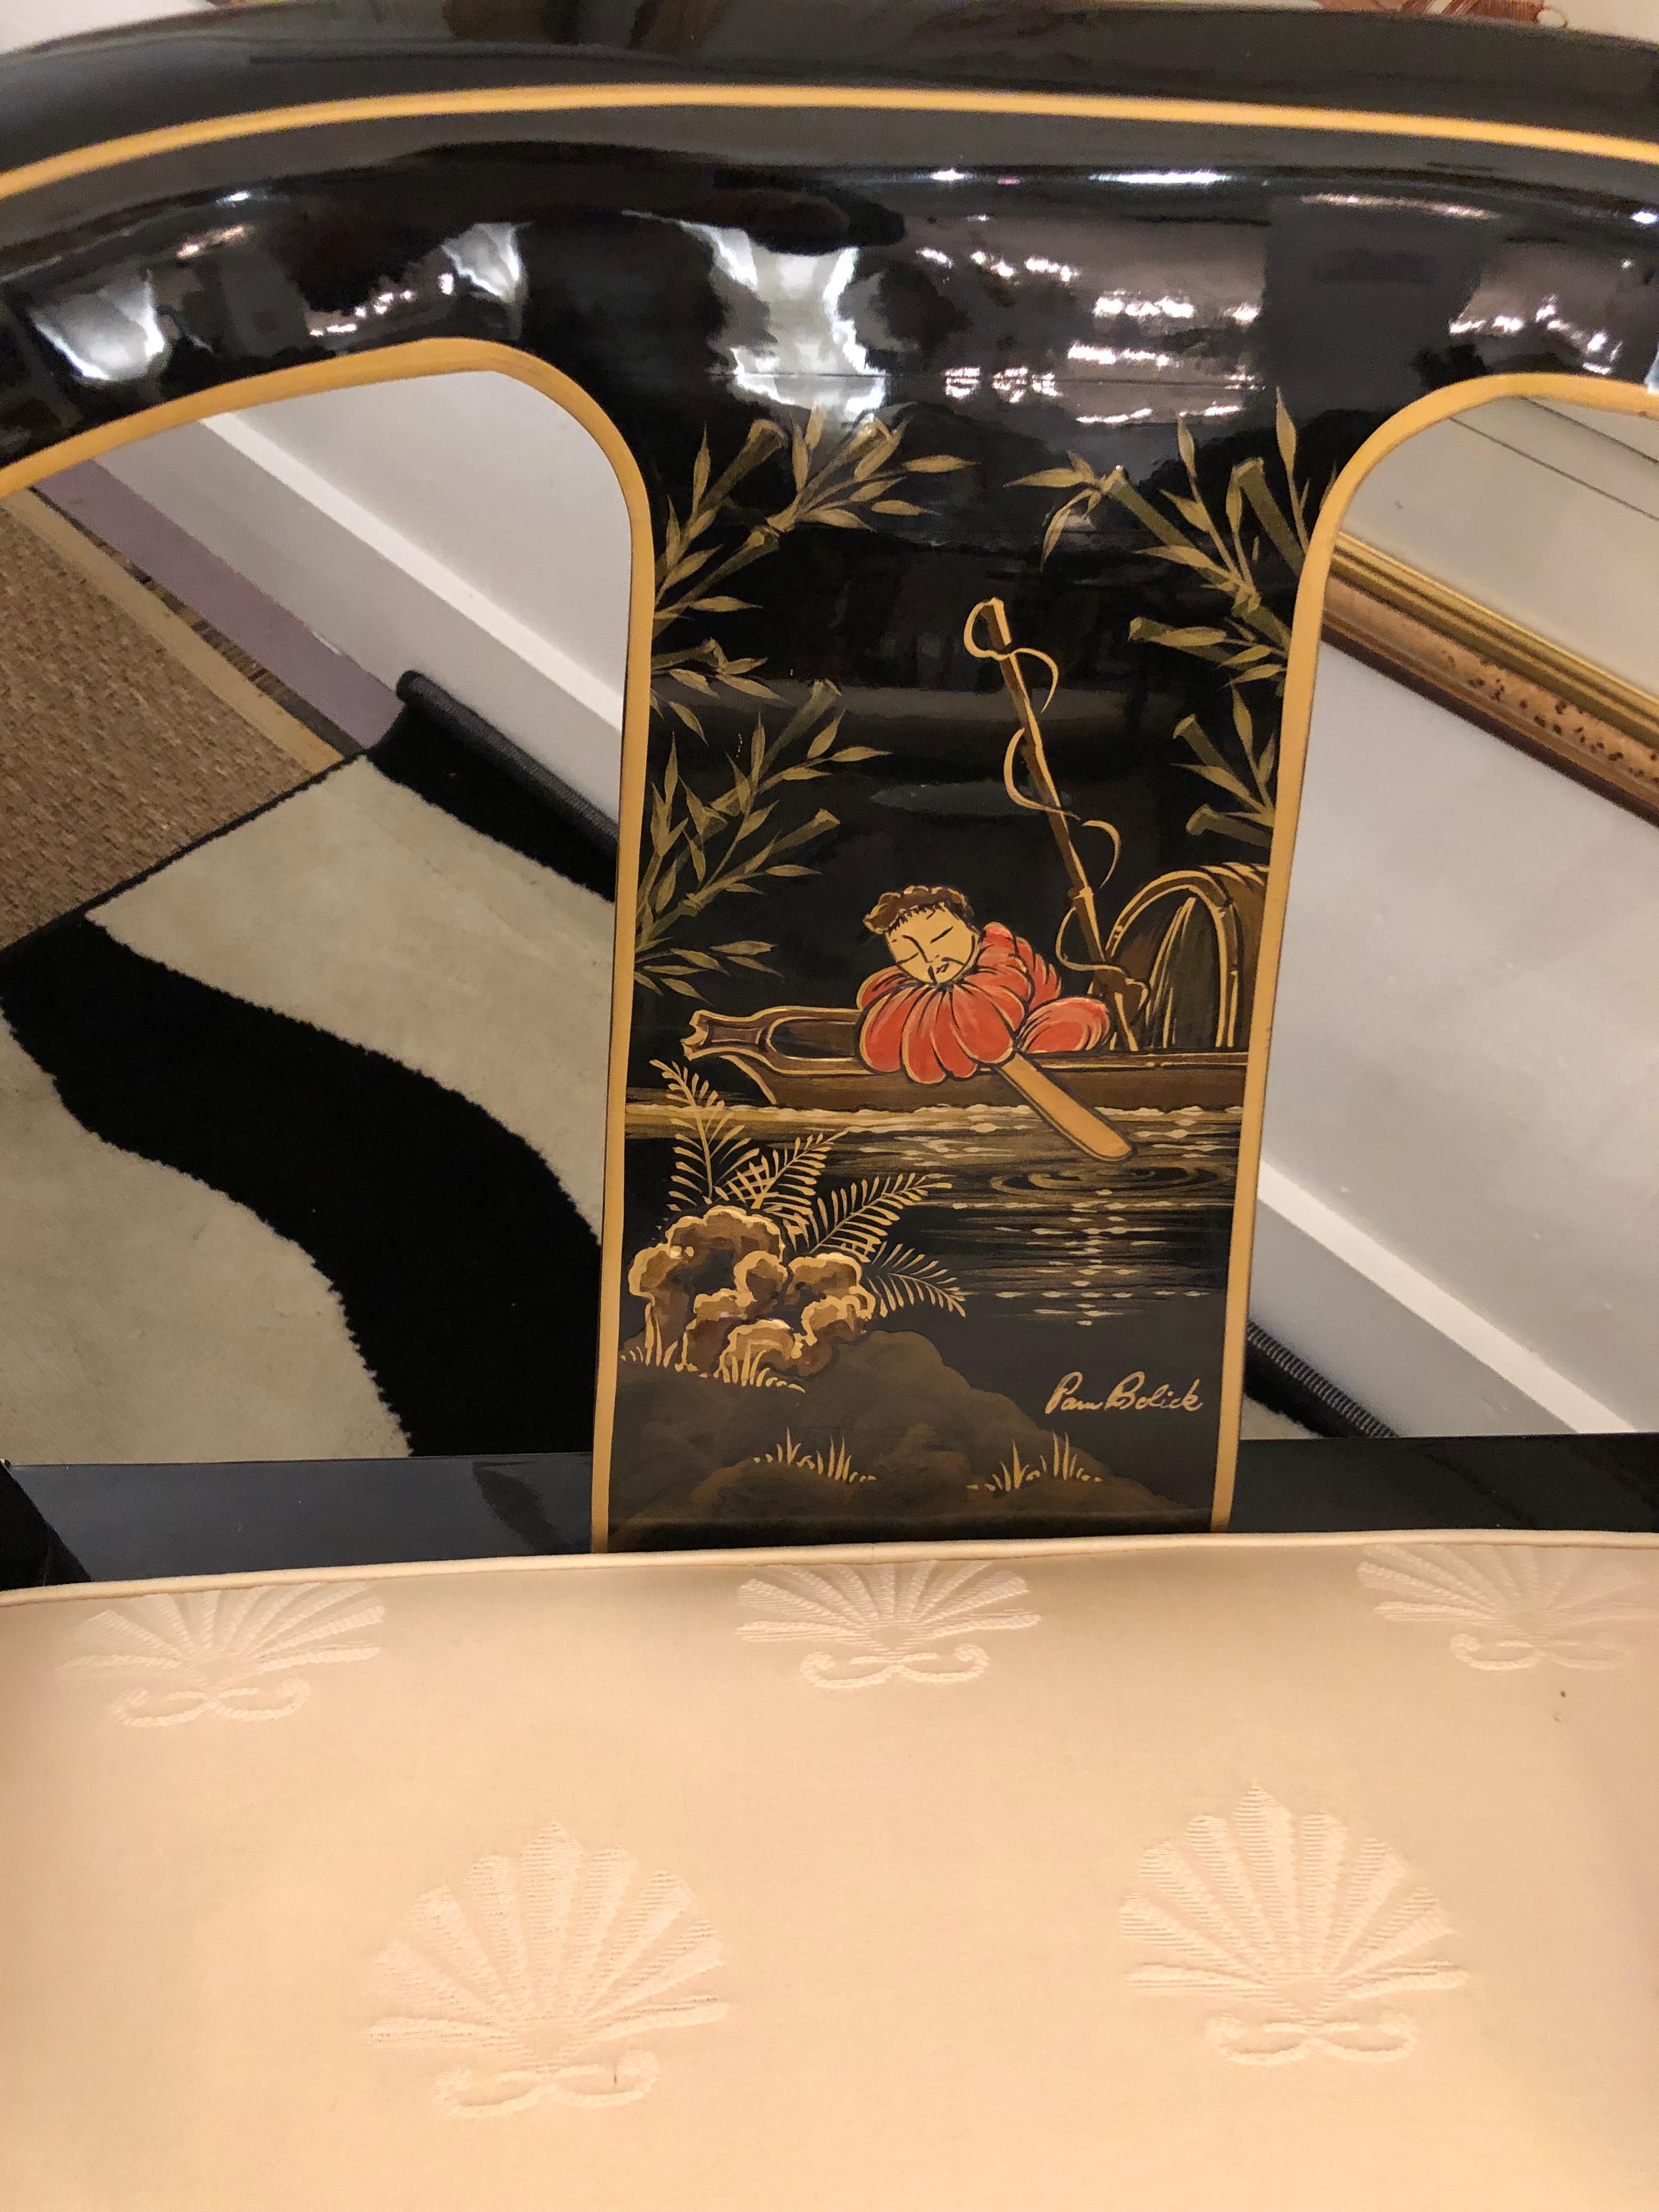 Sensational glamorous horseshoe shaped pair of James Mont style sculptural club chairs that match and are sold separately. High gloss black lacquer with brass details and Asian motif decoration in red and gold. Seats are a cream damask.
Loveseat